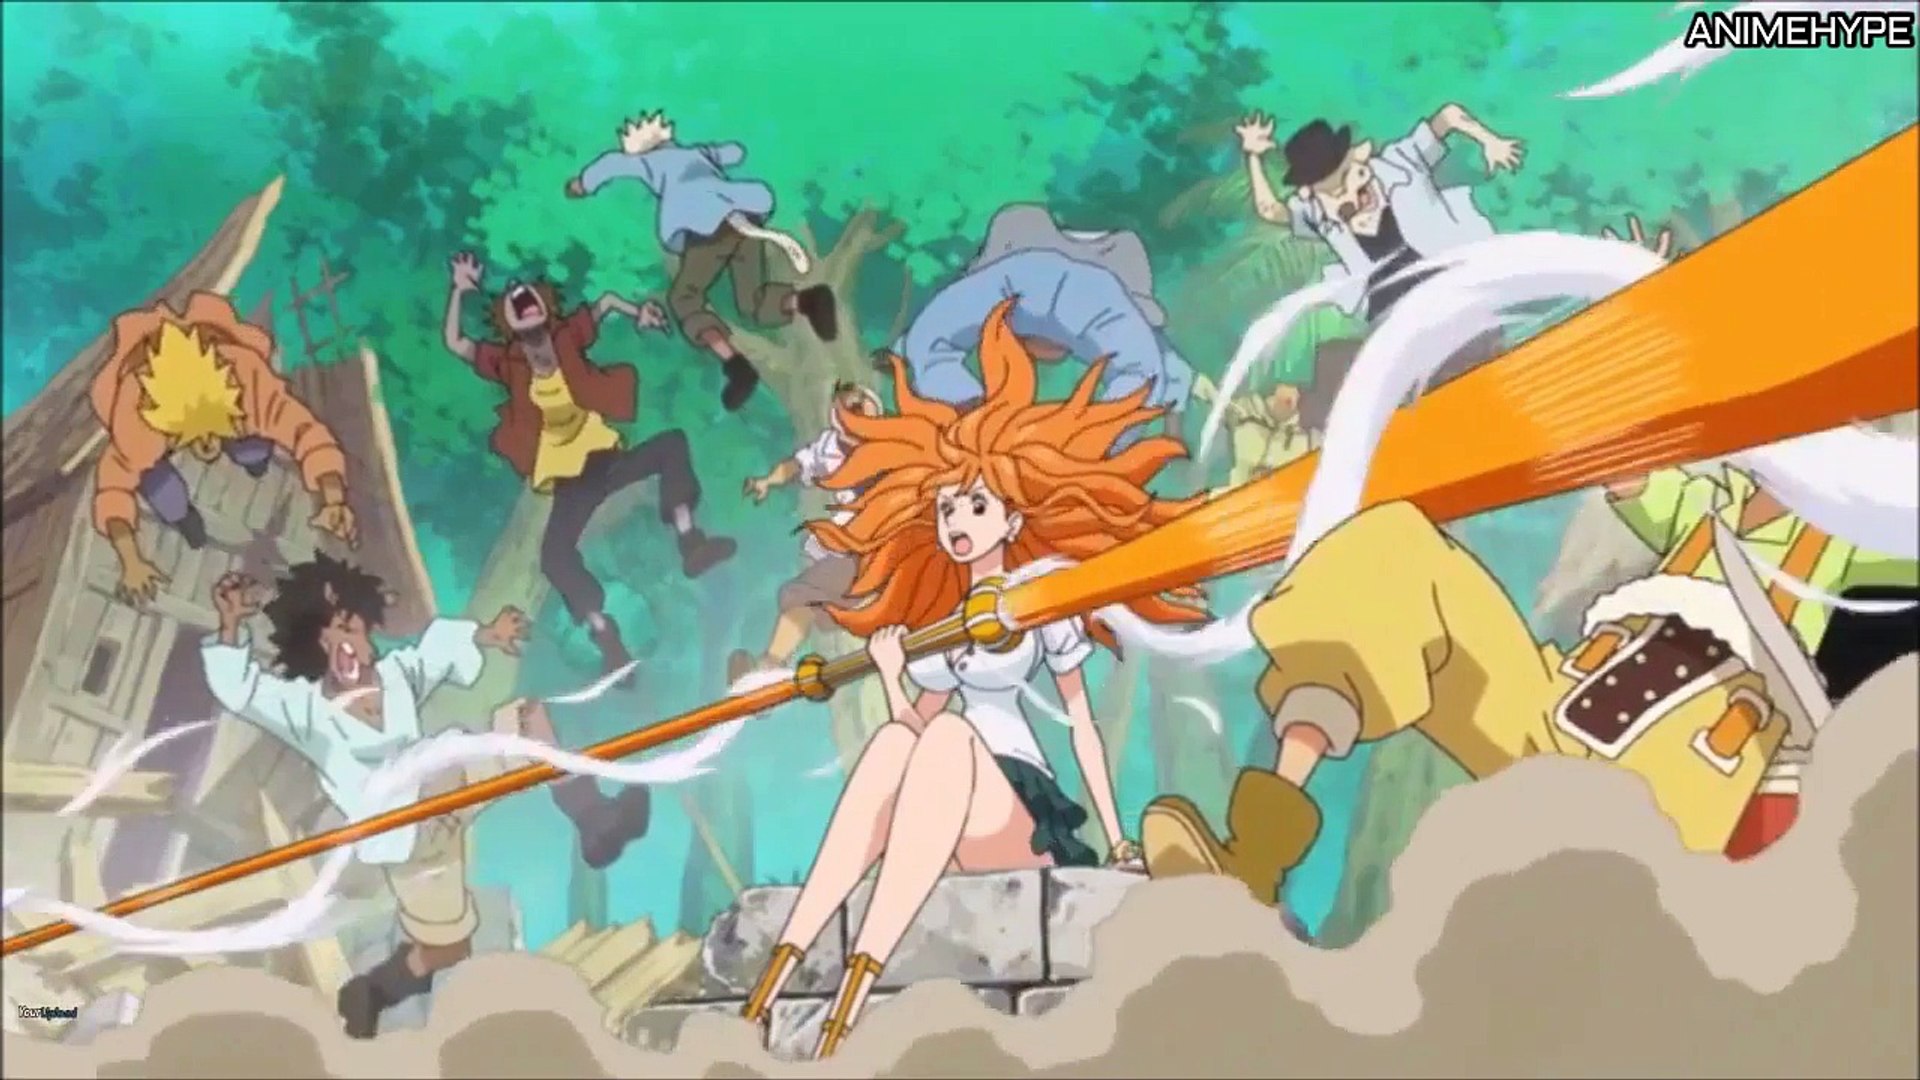 Nami's New Attack : Gust Sword (Eng Sub) HD 